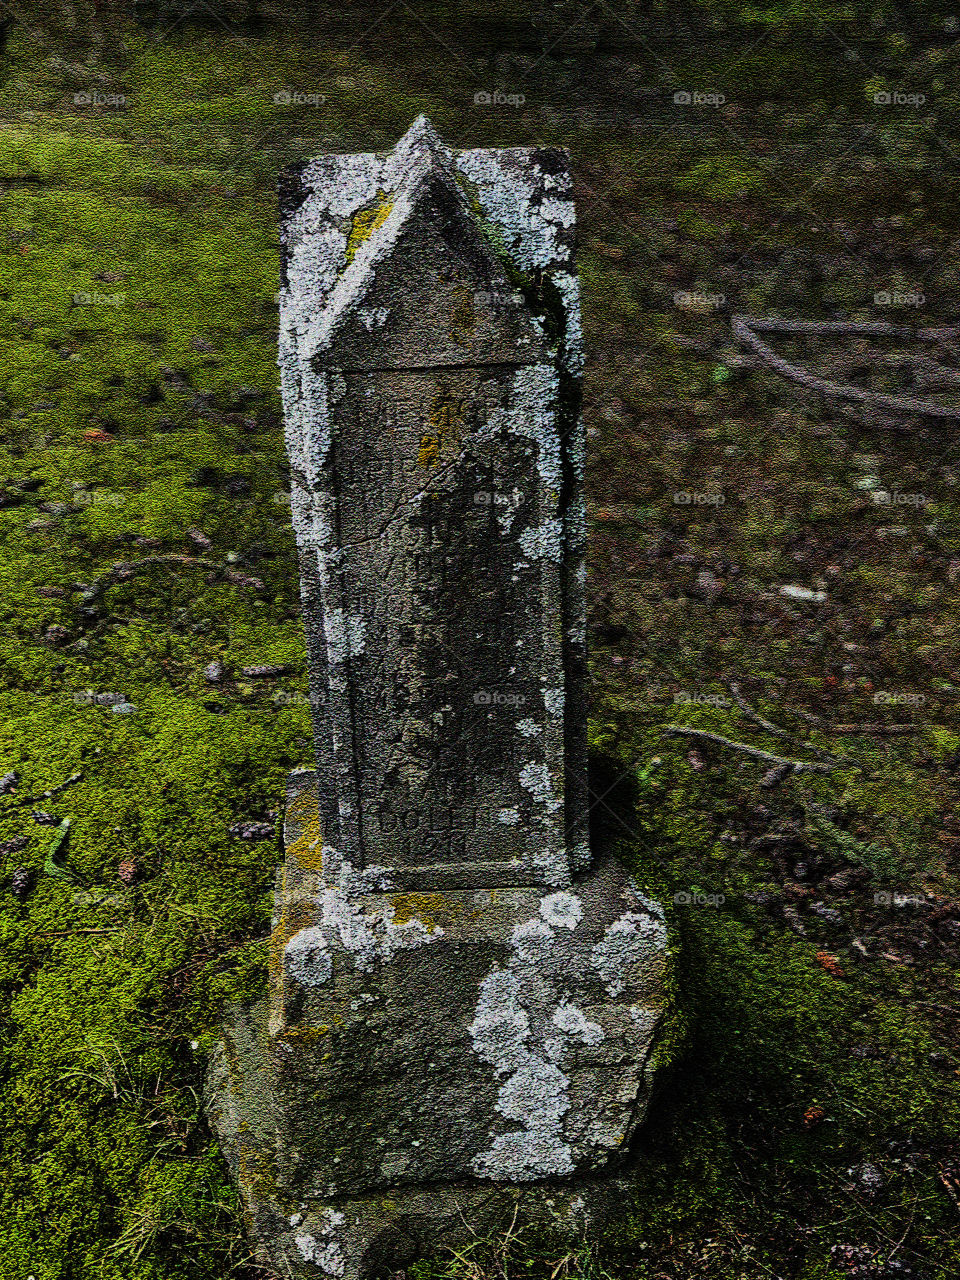 Been respectfully visiting cemeteries for photos opportunities. Took a photo of this lichen and moss encrusted grave marker and applied some desktop filters to add even more texture to the shot. 